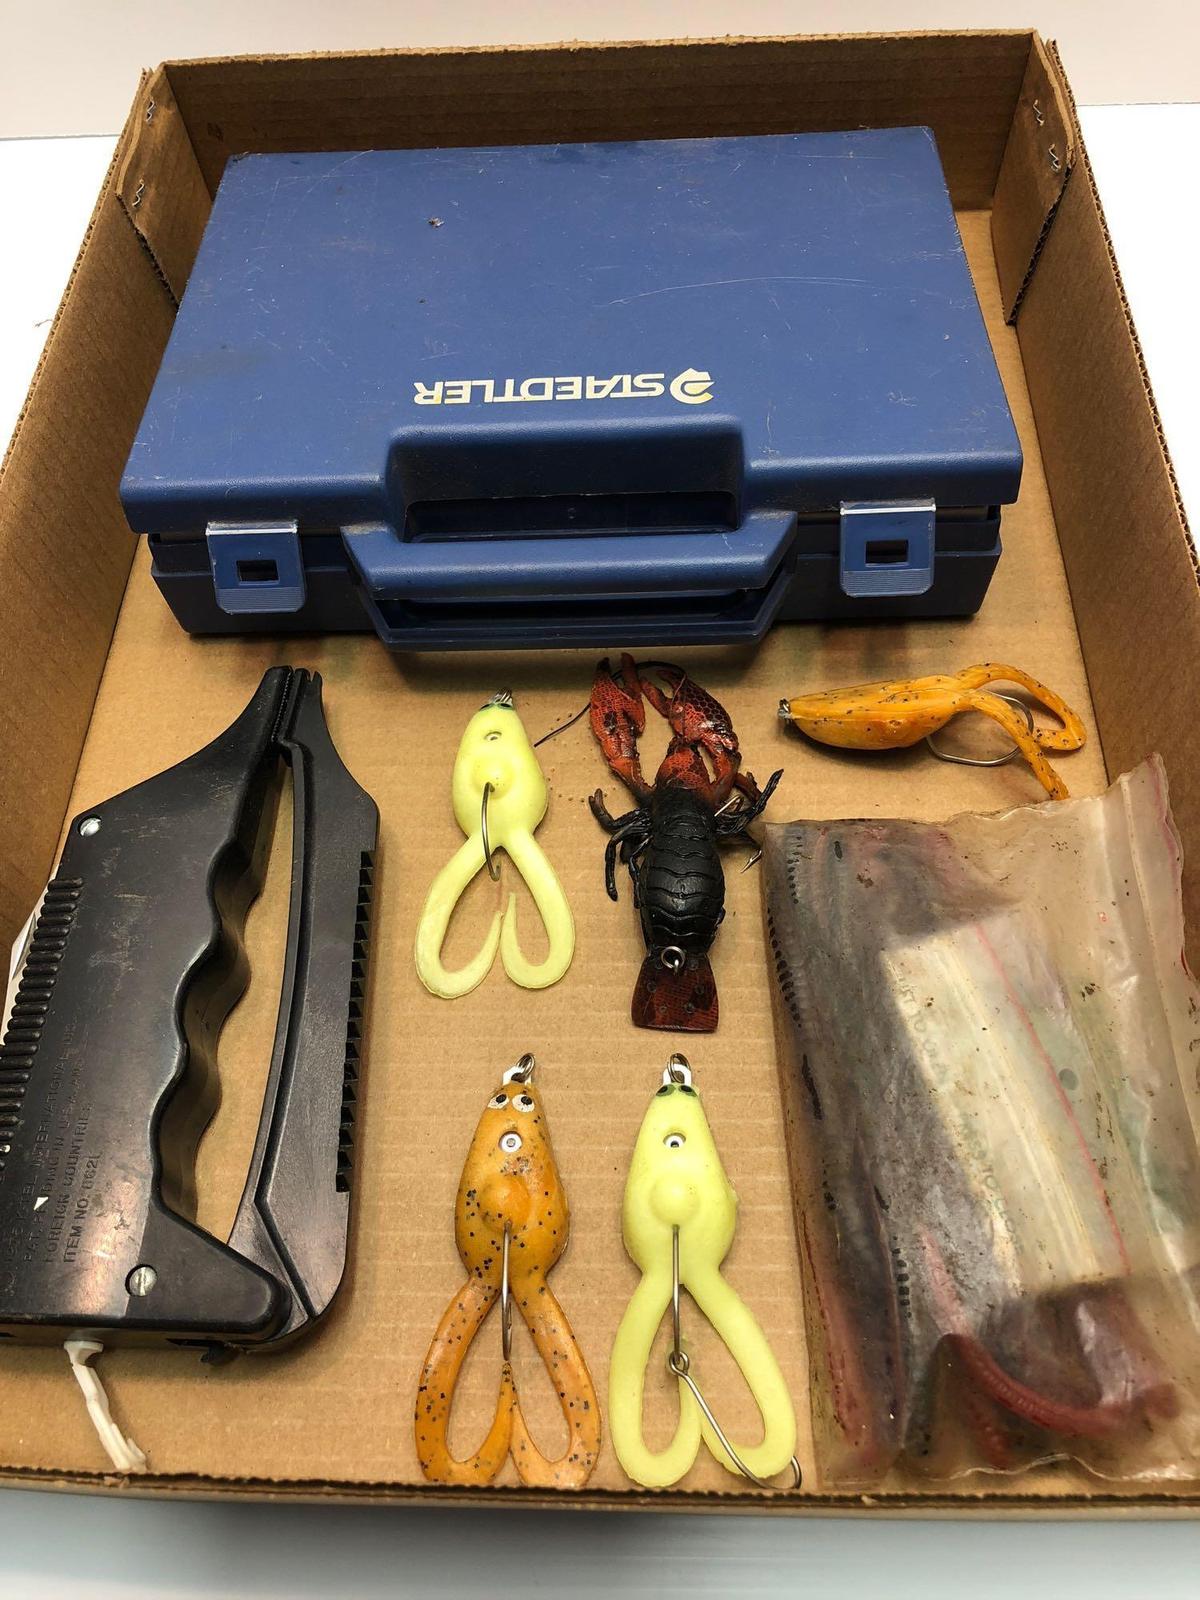 Fishing lures,gear,plastic tackle box